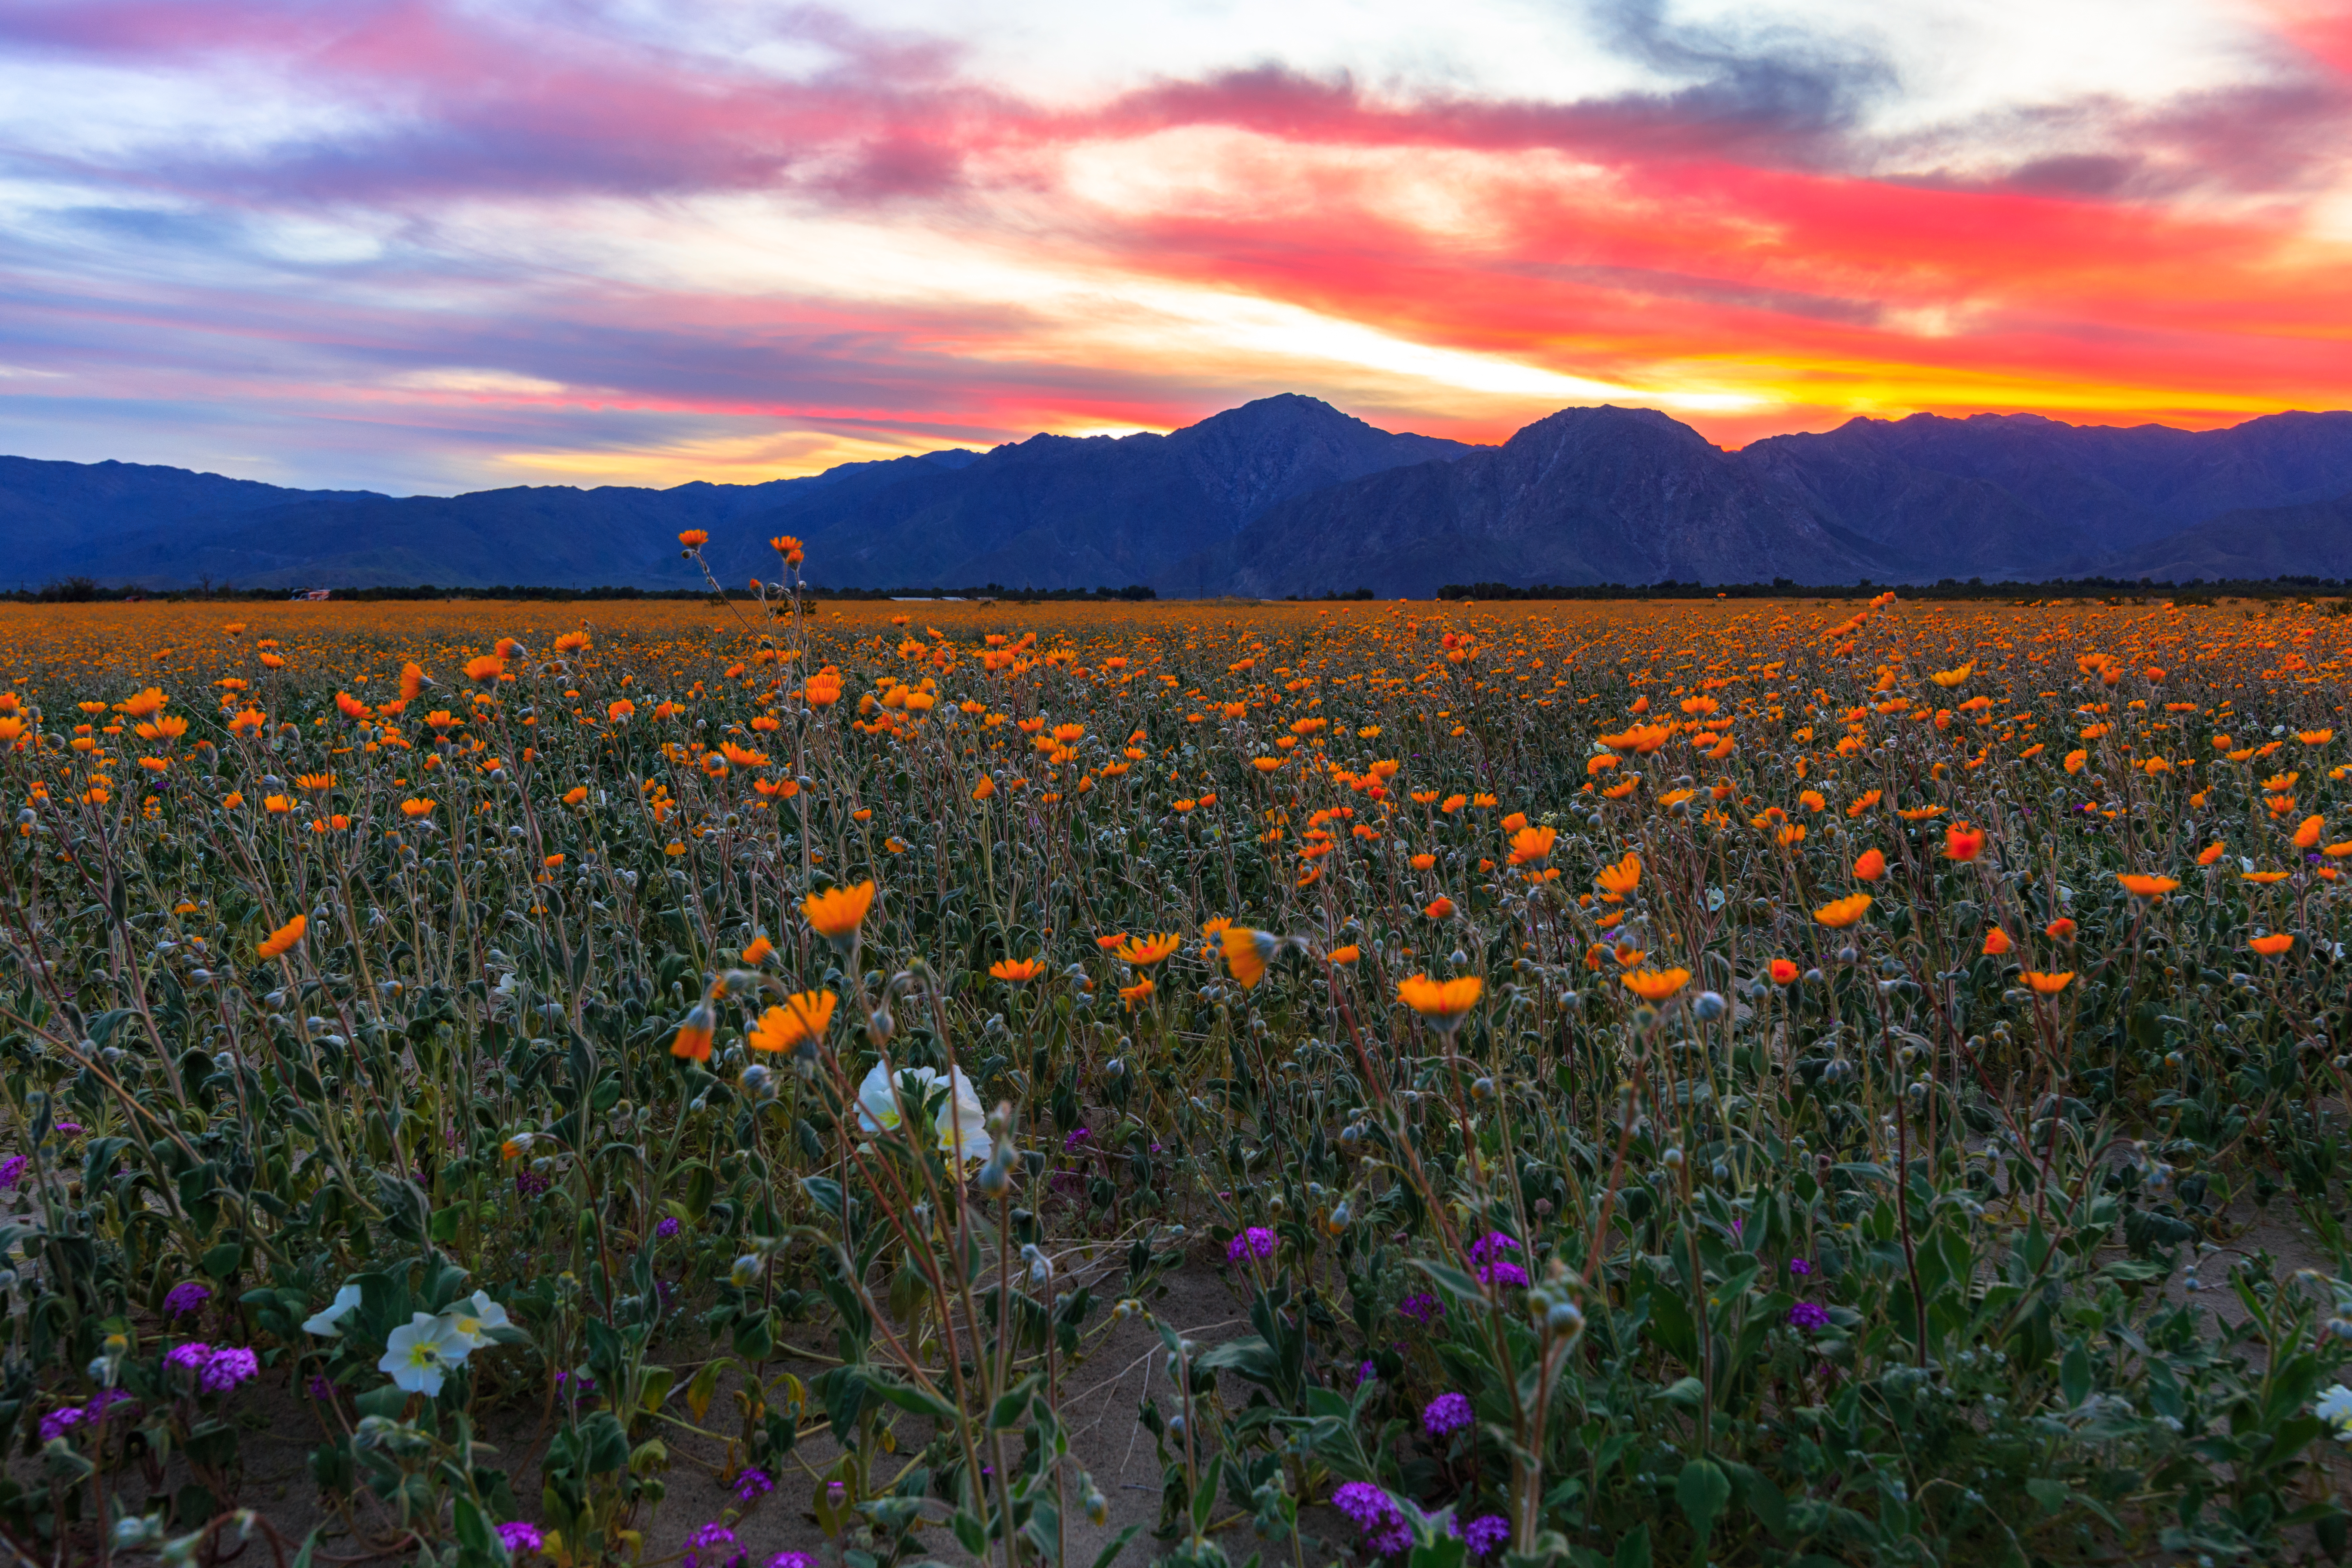 Photo of wildflowers bathed in a colorful sunset in Borrego Springs, CA by Kevin Key.